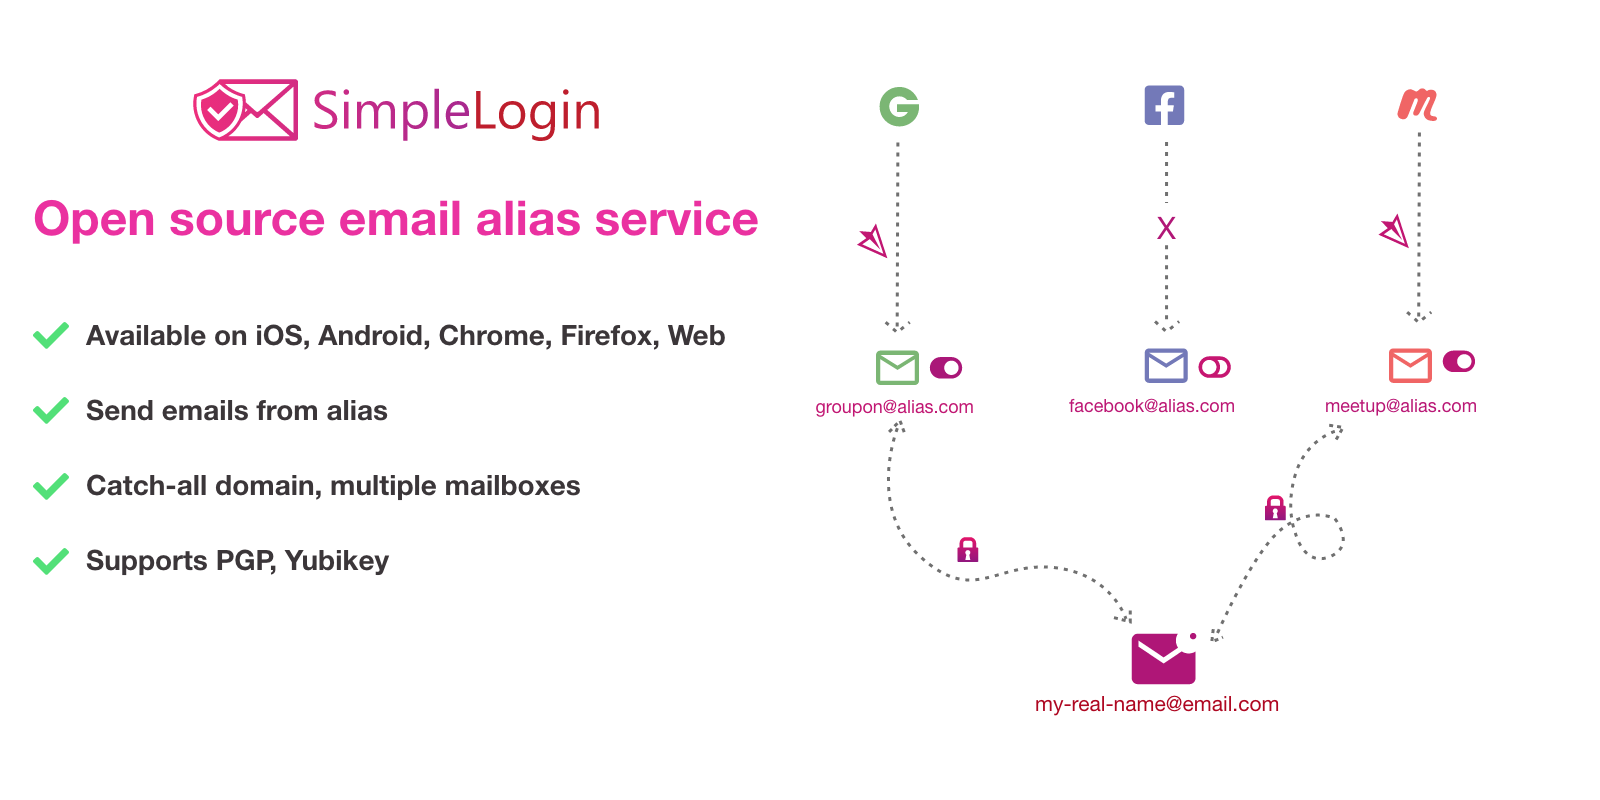 SimpleLogin | Open source anonymous email service